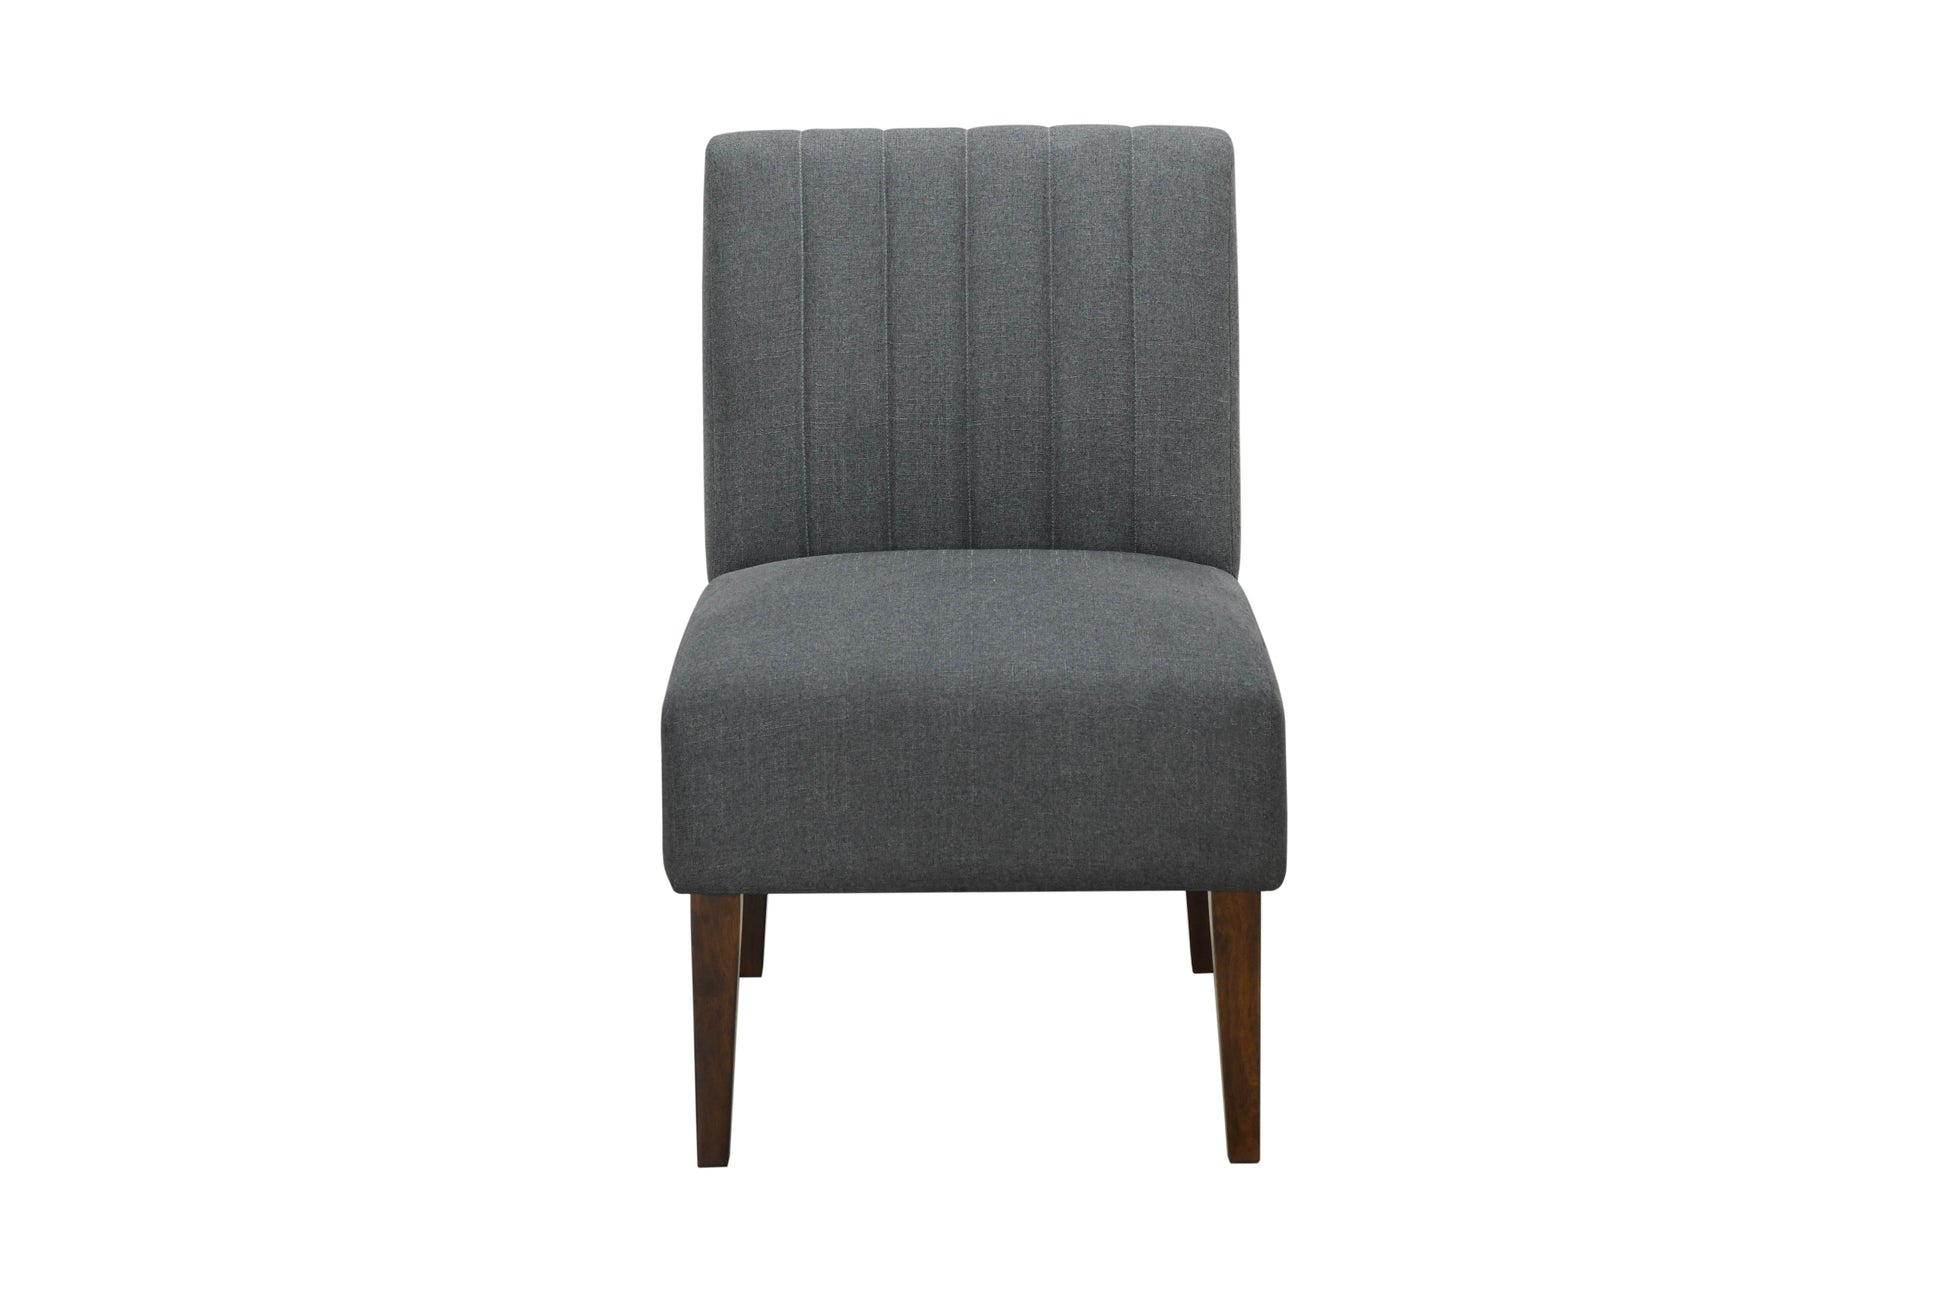 Stylish Comfortable Accent Chair 1pc Dark Gray Fabric dark gray-primary living space-wood